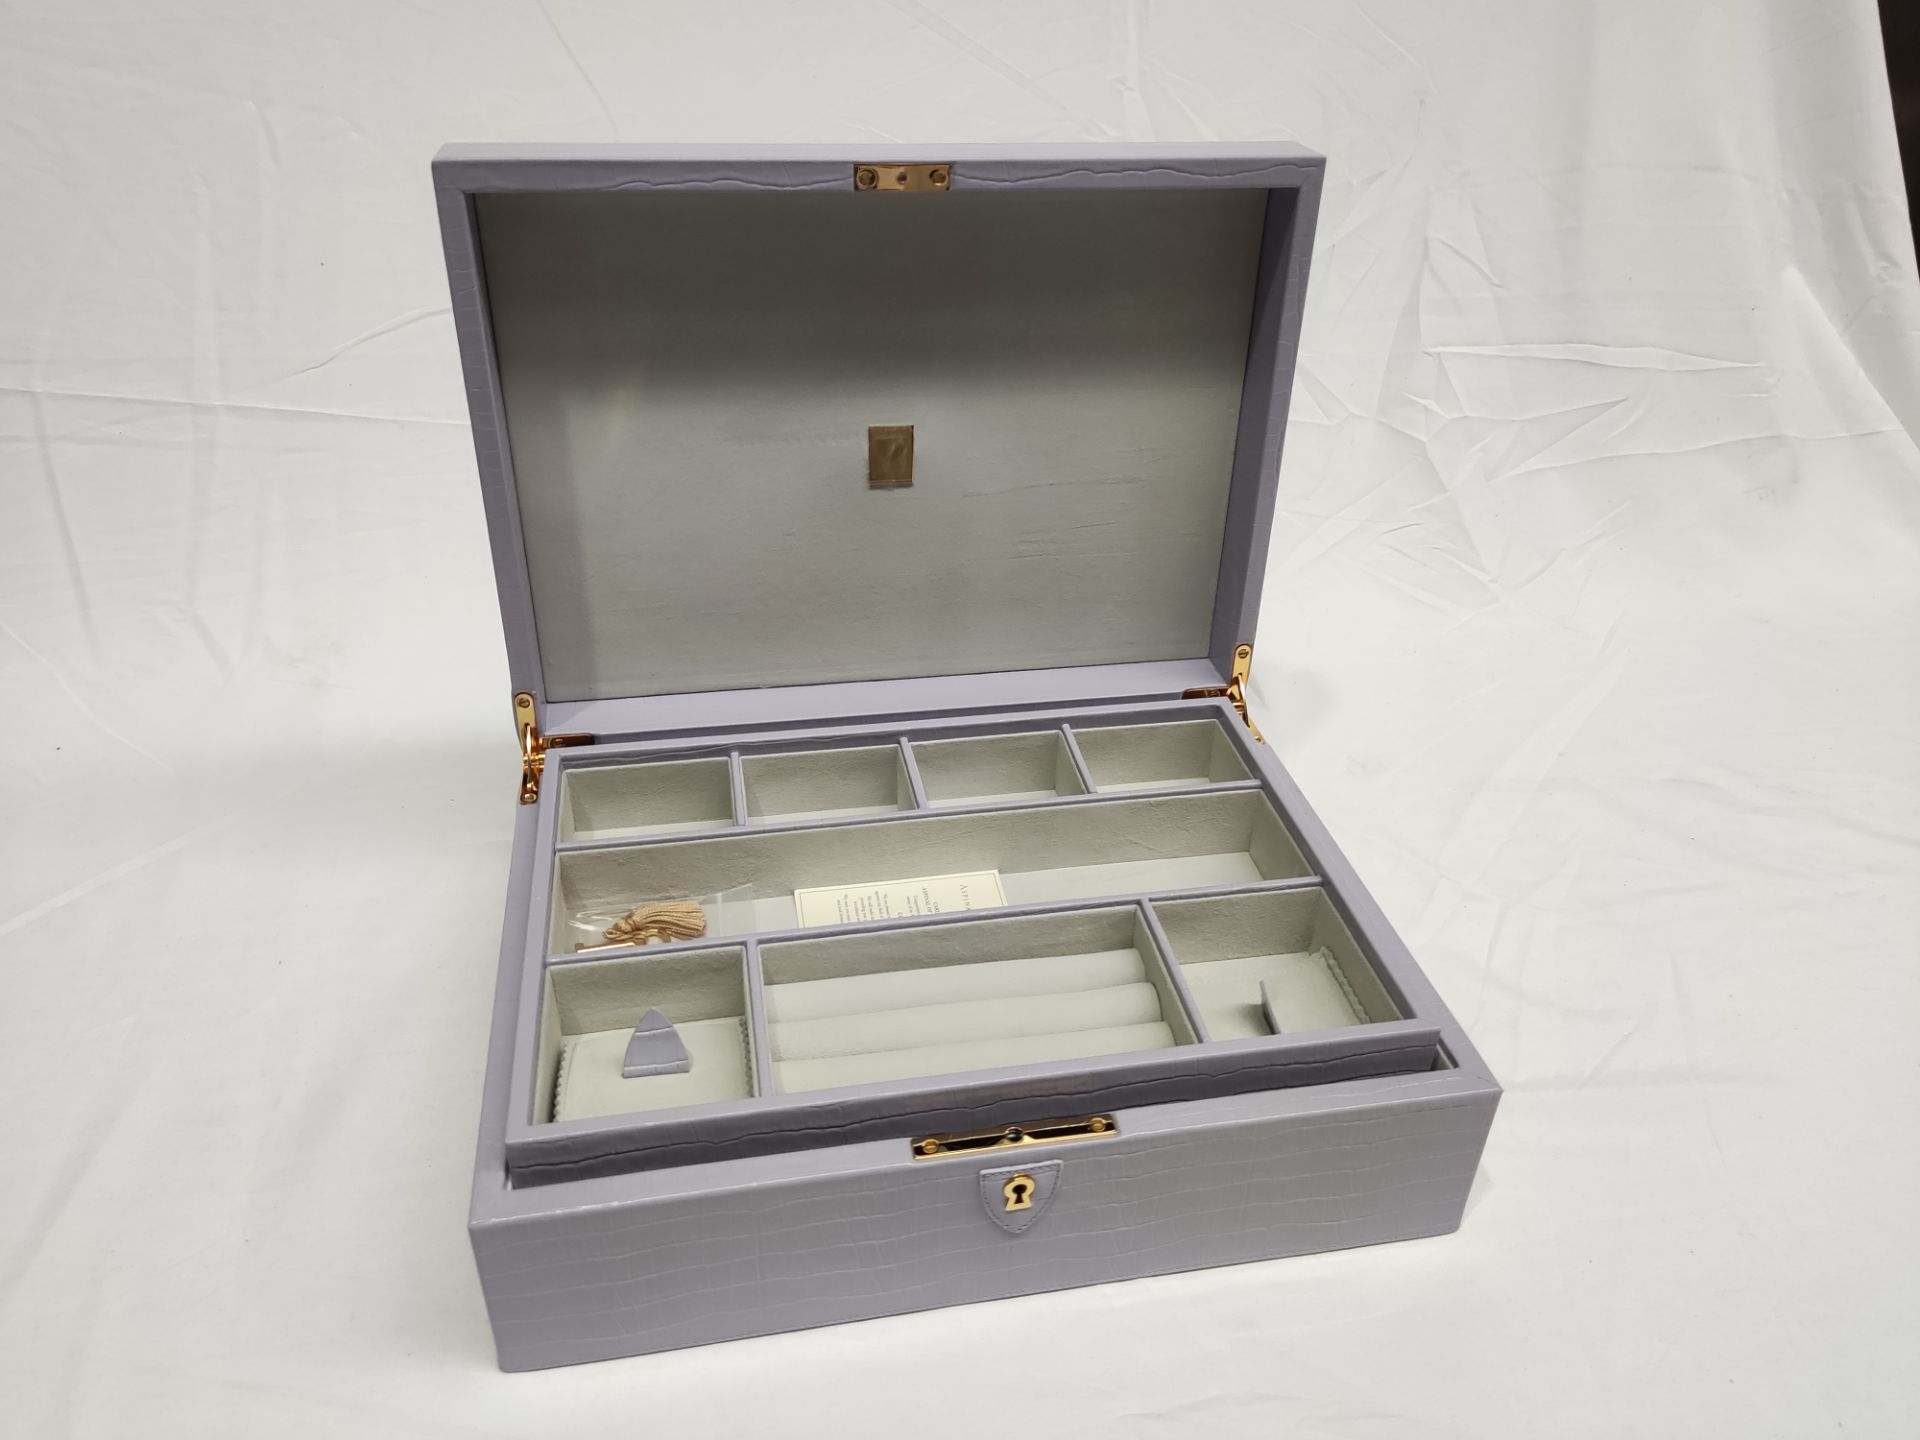 1 x ASPINAL OF LONDON Grand Luxe Jewellery Case In Deep Shine English Lavender Croc - Original - Image 17 of 34